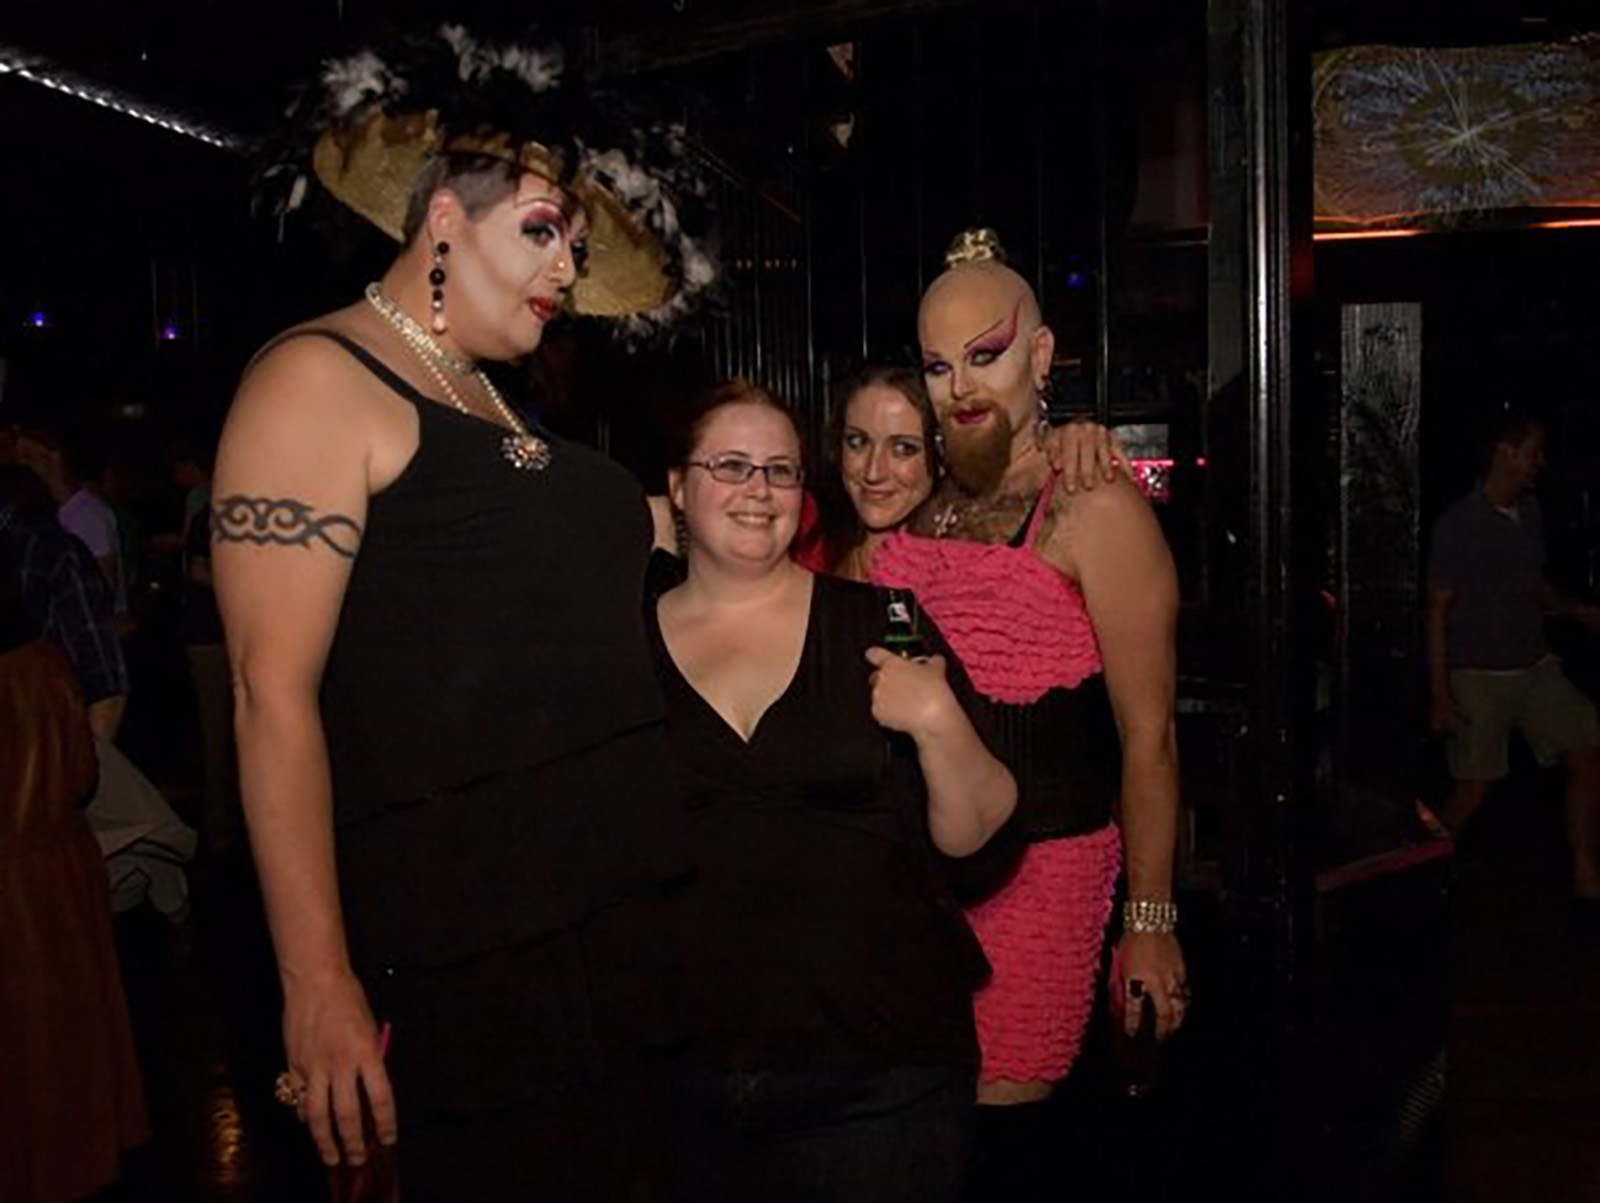 Attendees of the Gay-La reception at Neighbours Nightclub and Lounge, which followed a screening of Patrik Age 1.5 at Egyptian